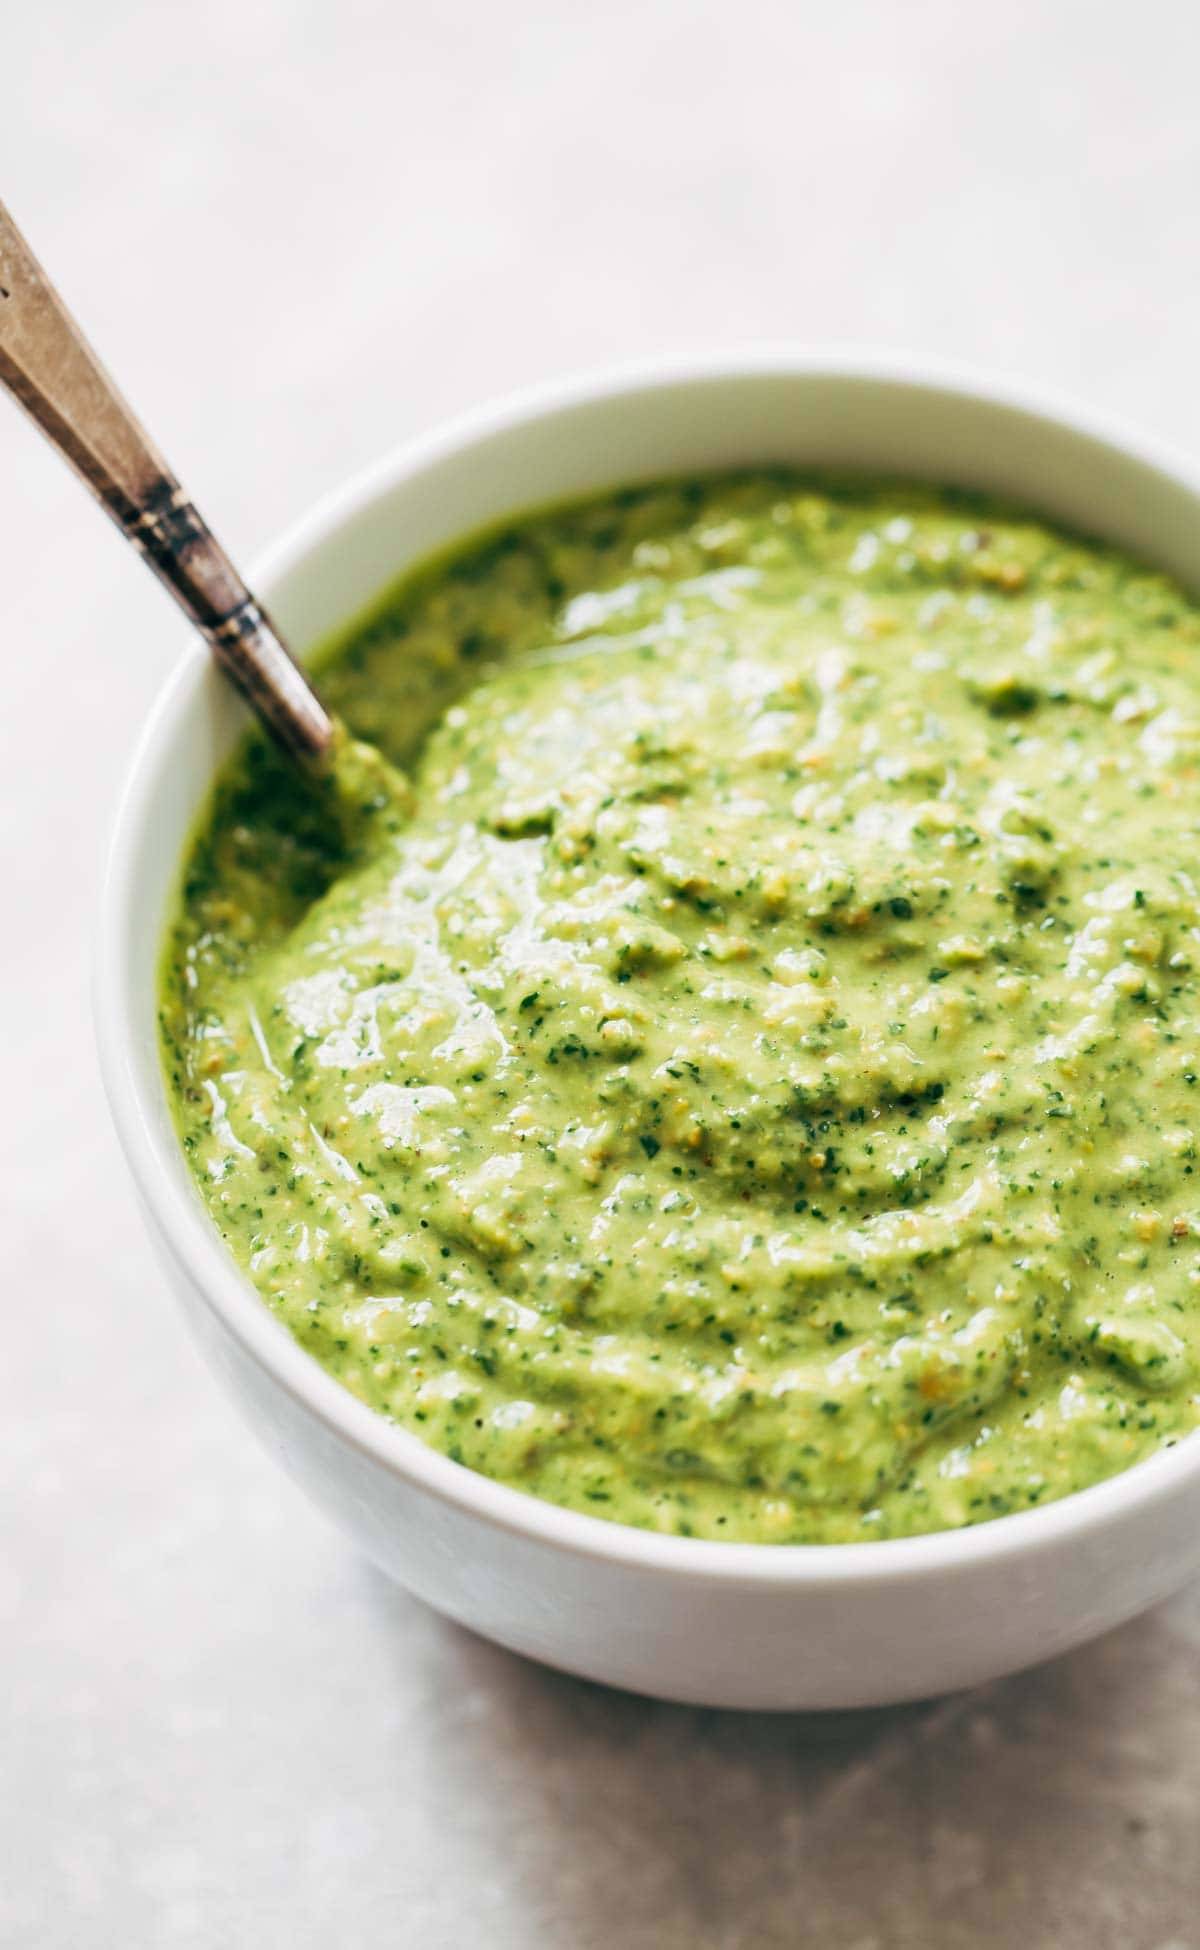 5 Minute Magic Green Sauce - this sauce goes with anything as a dip, dressing, marinade, or spread! Easy ingredients like avocado, parsley, cilantro, garlic, and lime. Vegan! 